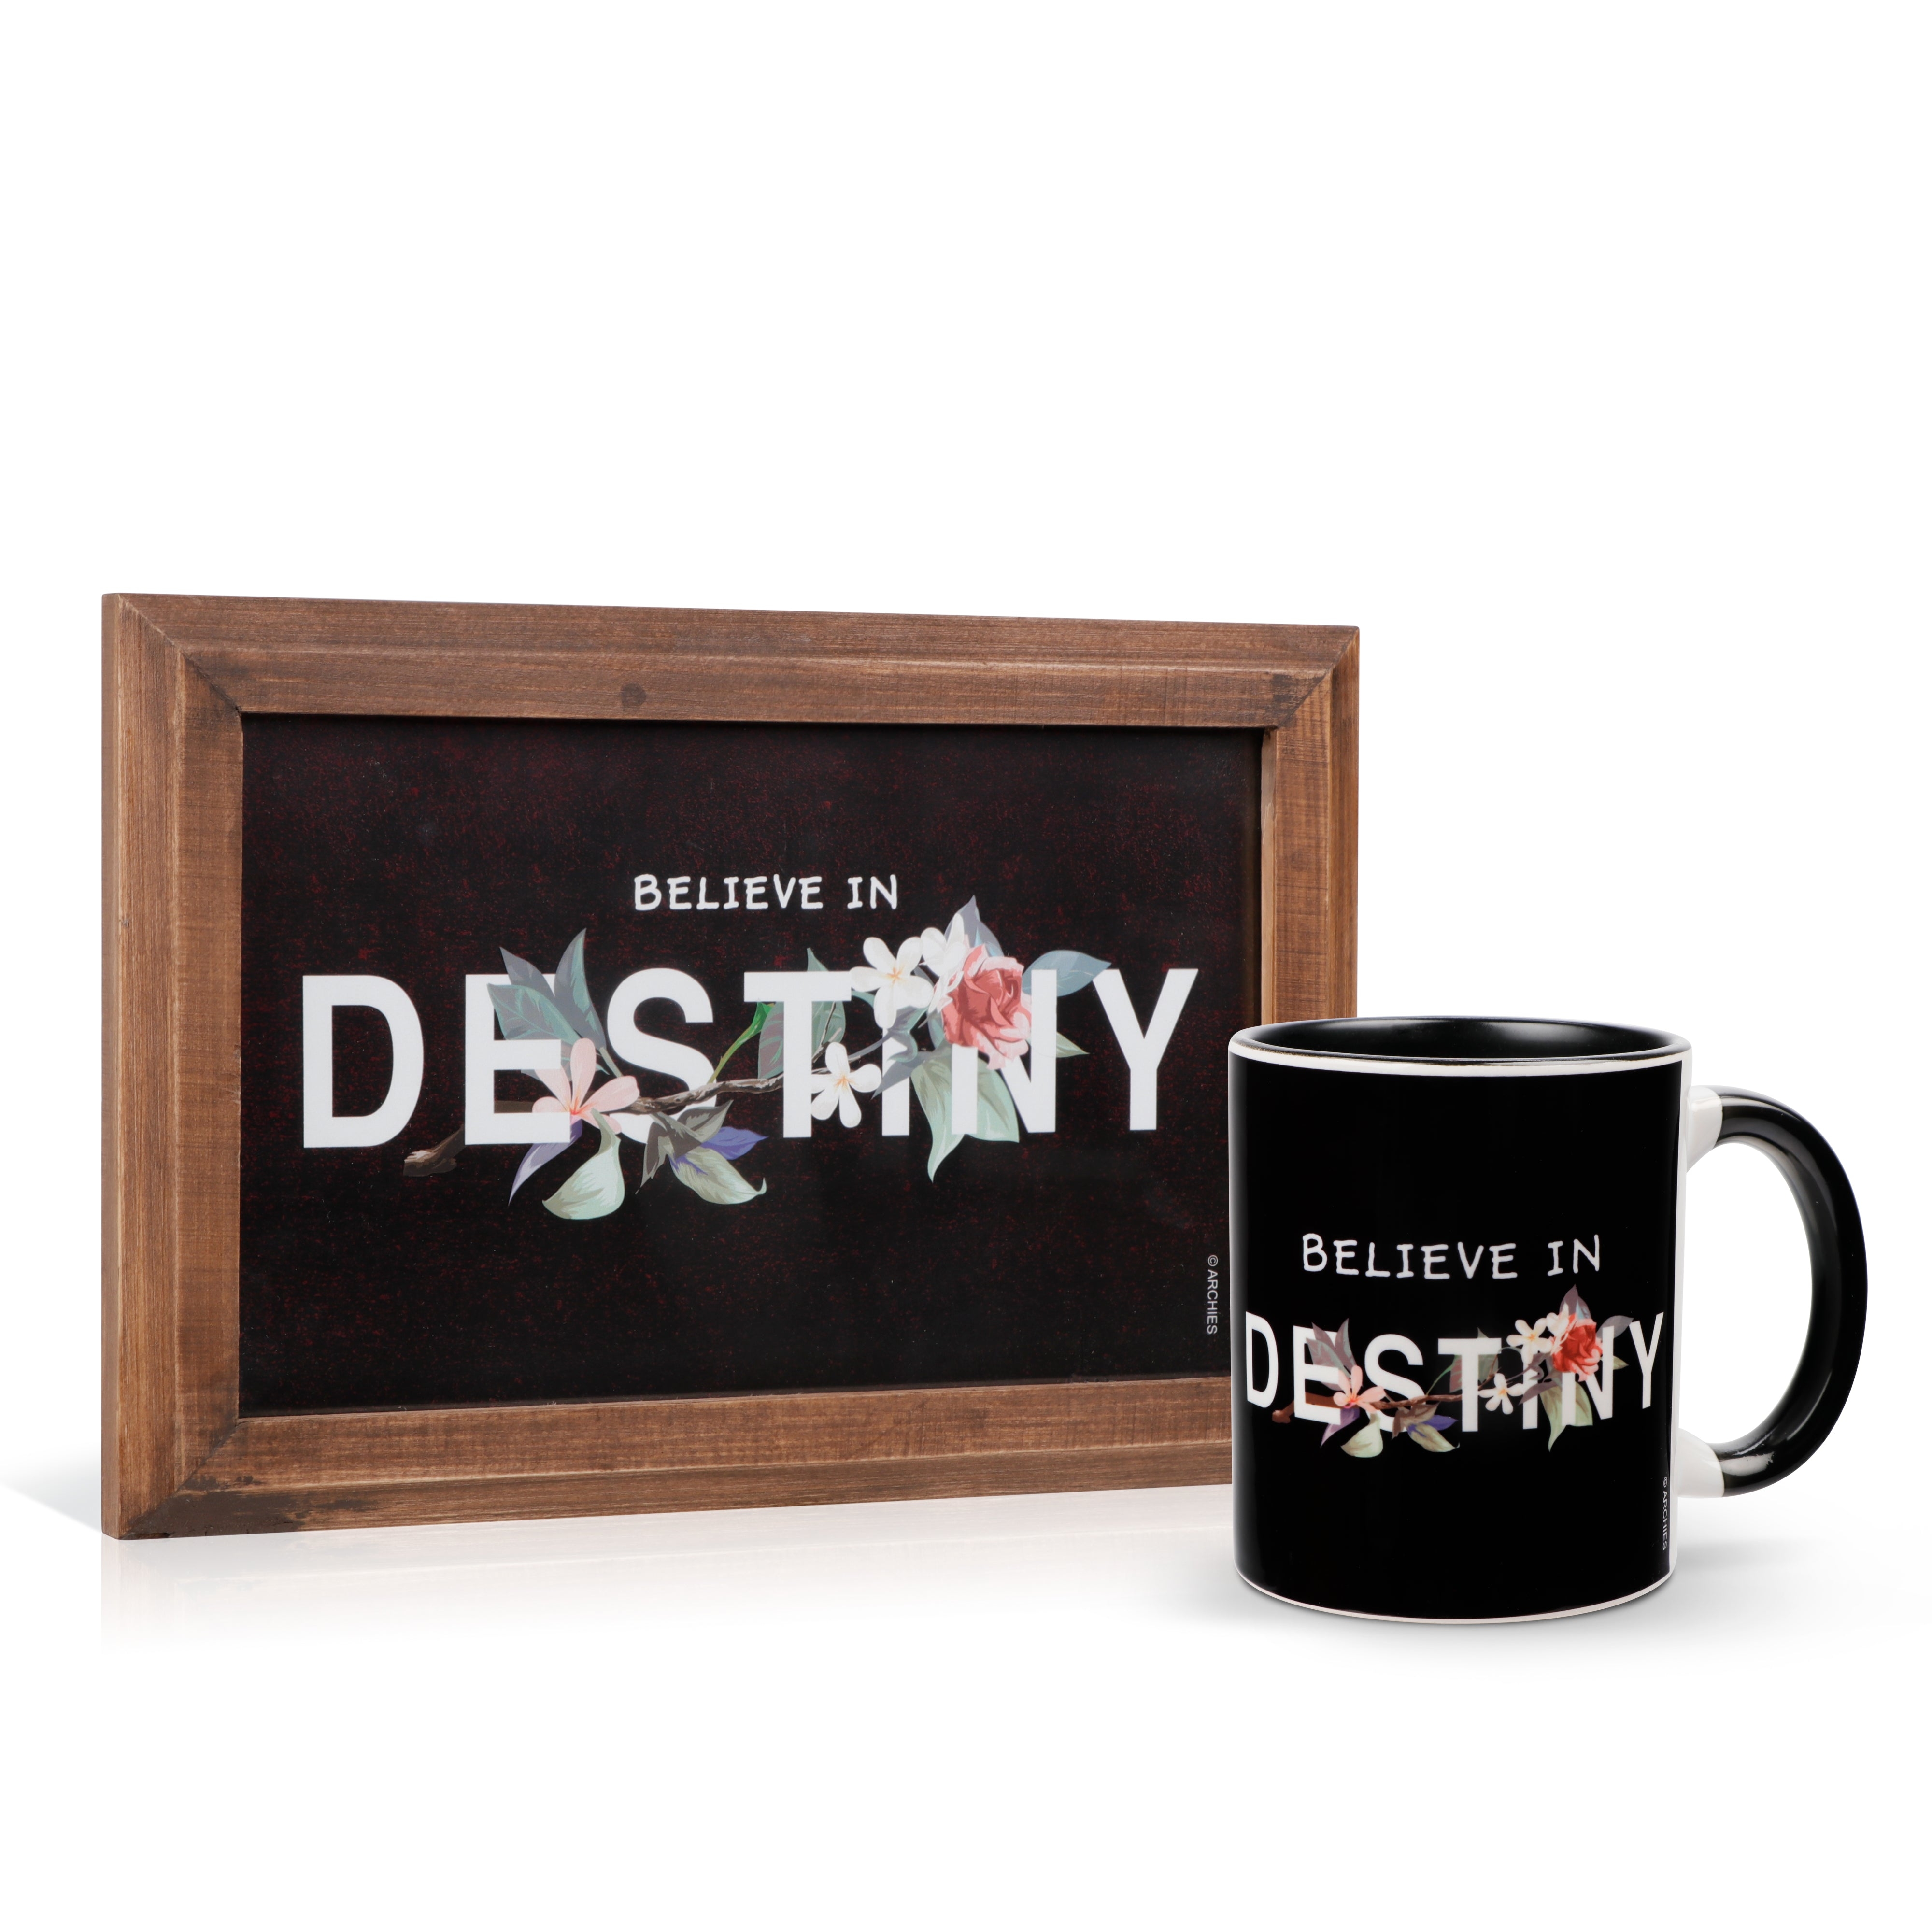 Archies | Archies KEEP SAKE Combo Gift with Ceramic Mug and Elevated Initial Quotatio- BELIEVE IN DESTINY